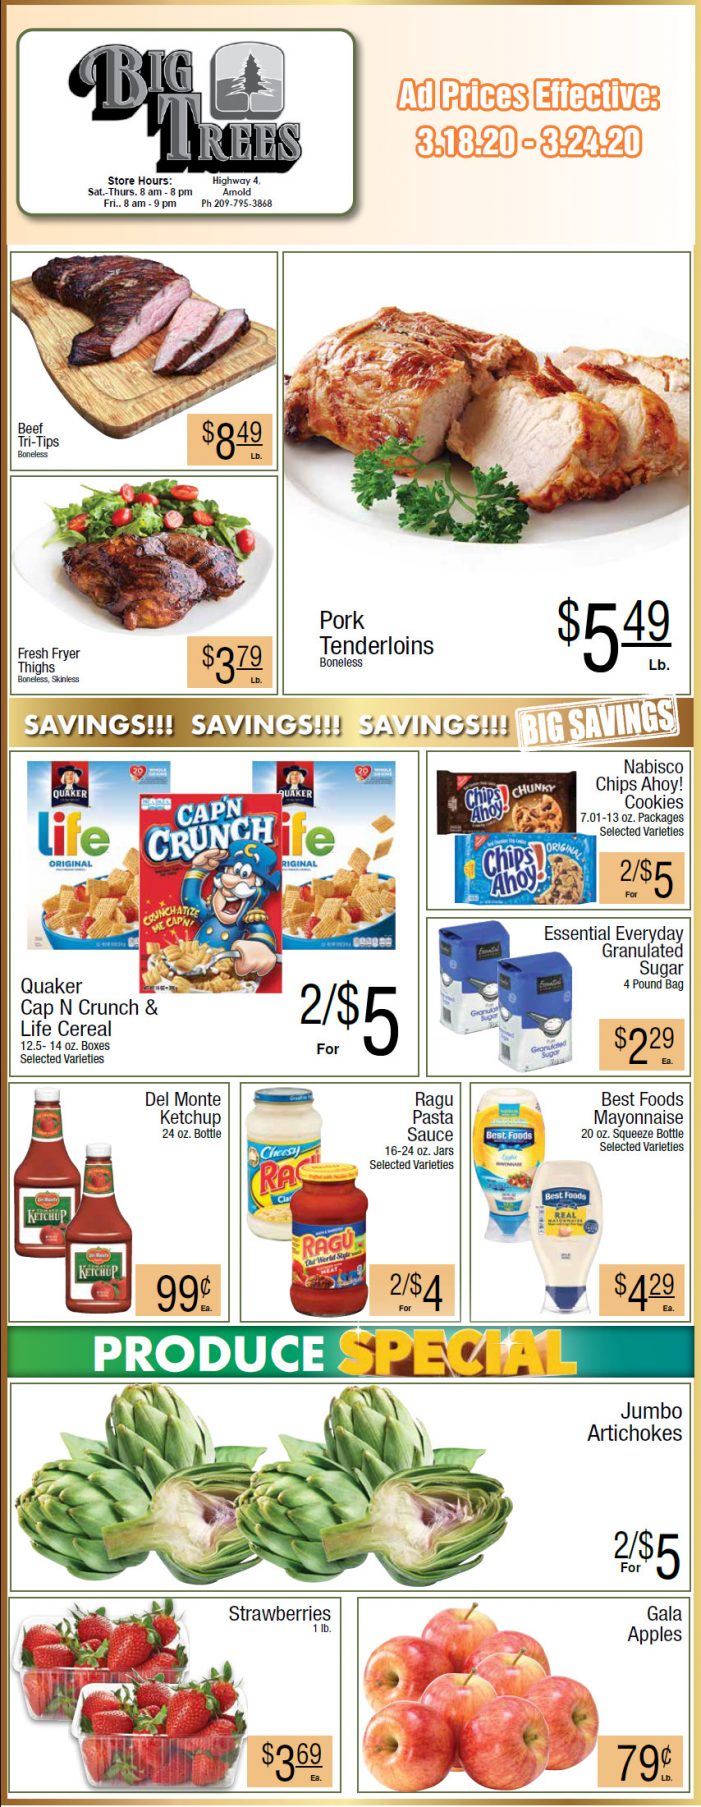 Big Trees Market Weekly Ad & Grocery Specials Through March 24th.  Shop Local & Save!!